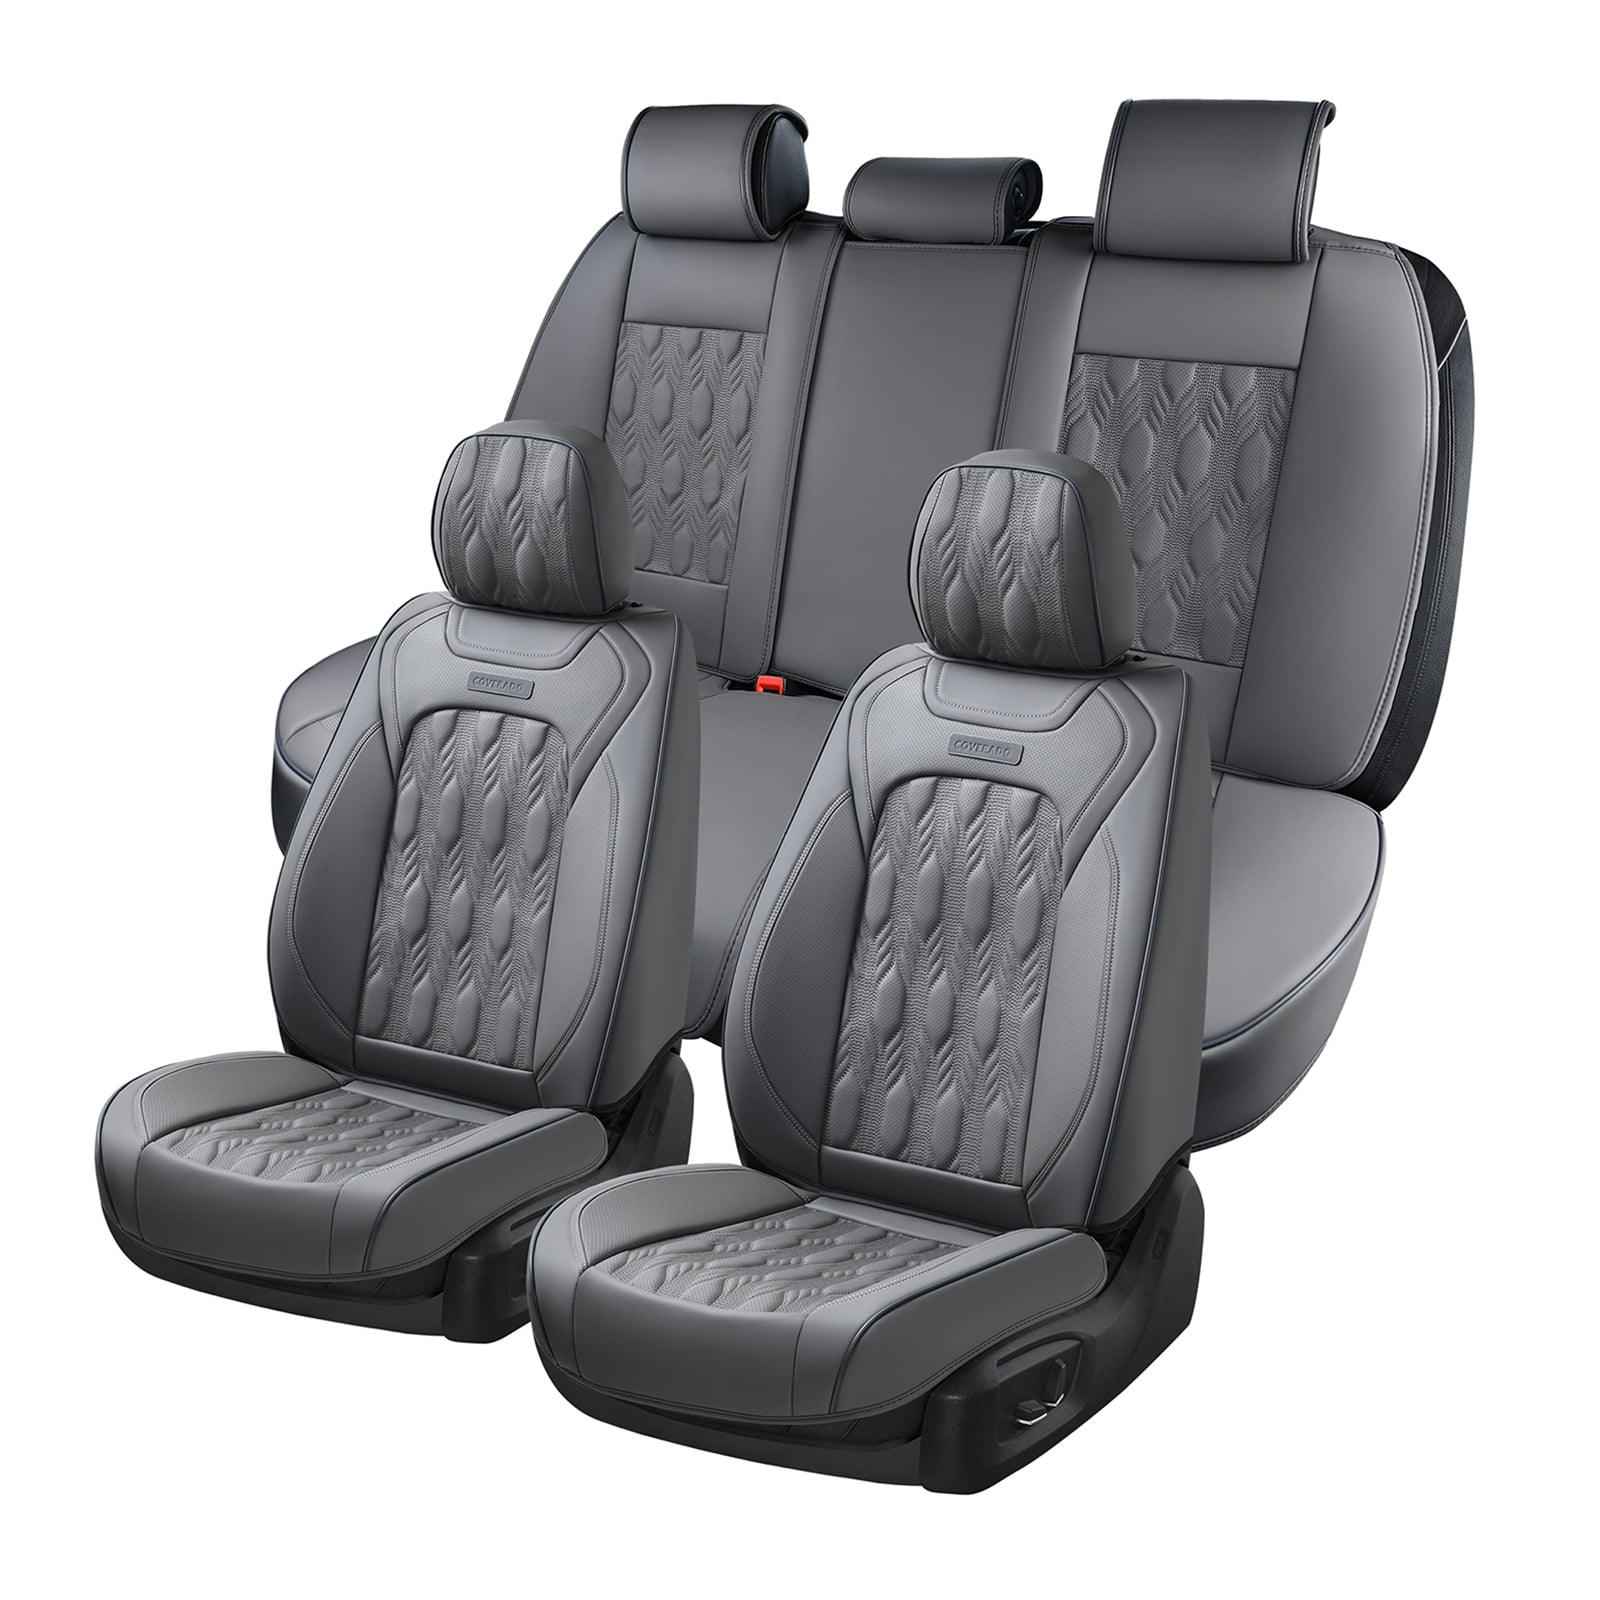 Seat Covers & Accessories - Buy Seat Covers & Accessories at Best